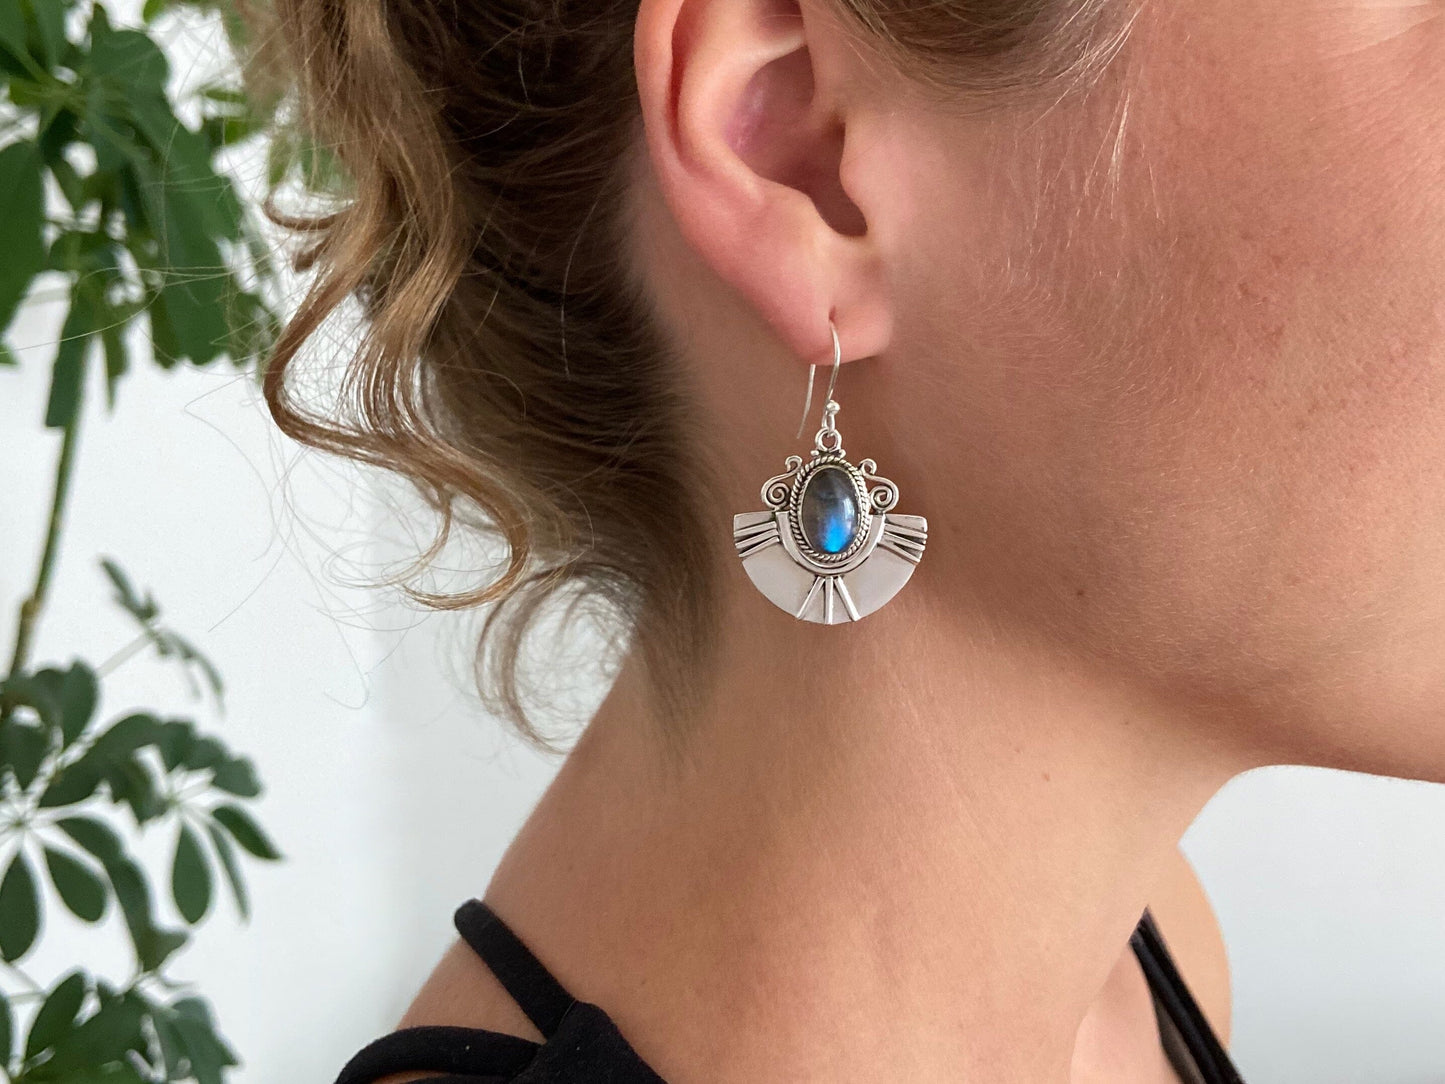 Fan-shaped earrings with oval stone made of silver 